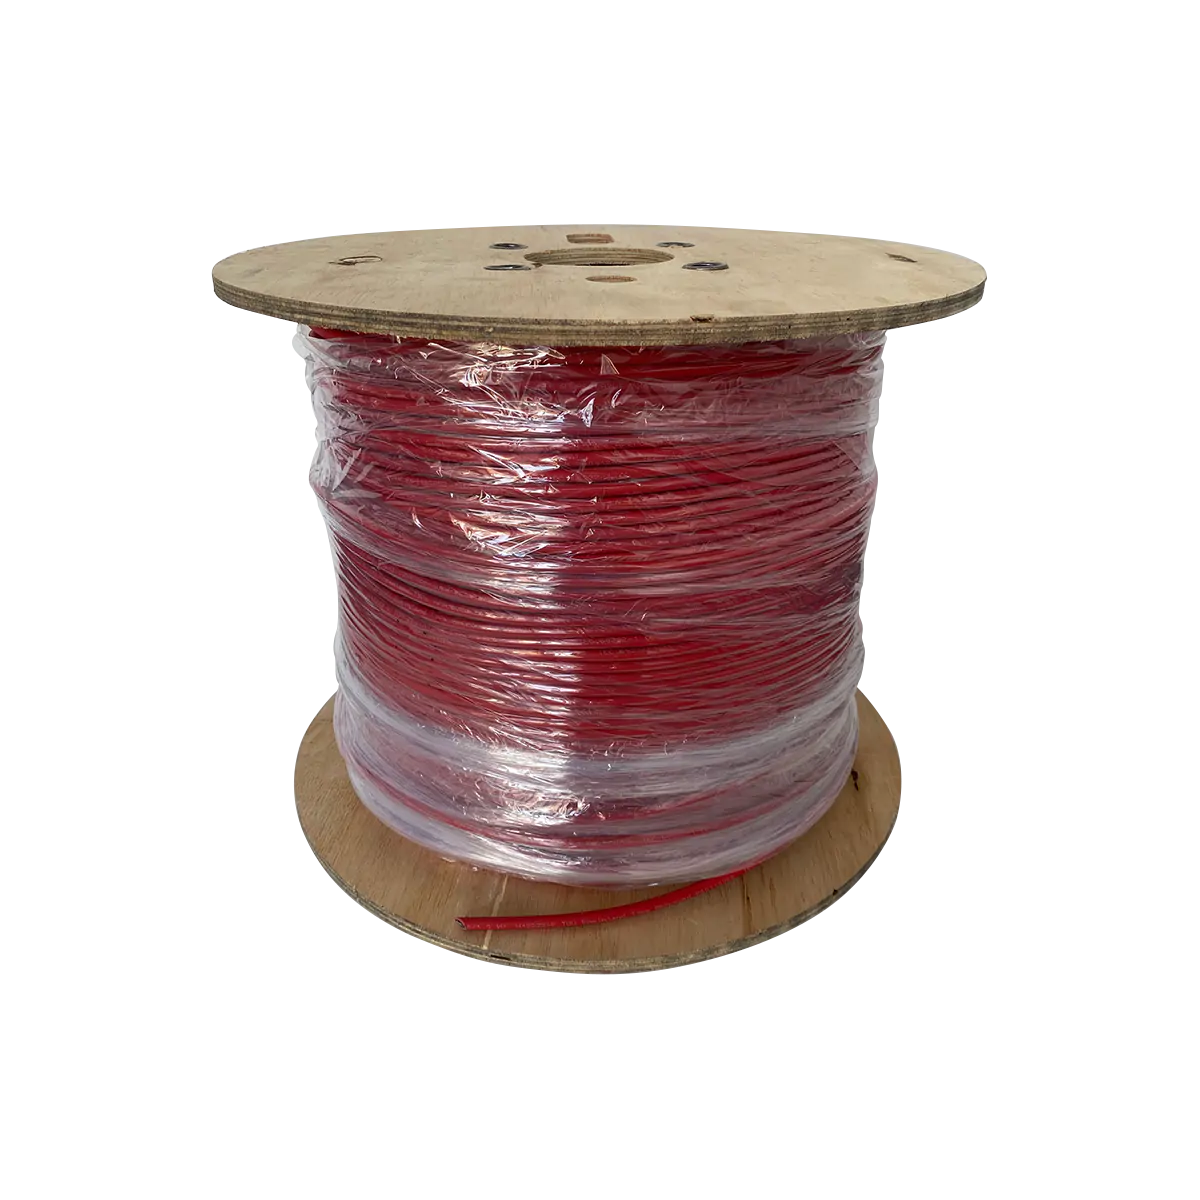 Athilex cable 4mm Red 500 Meters